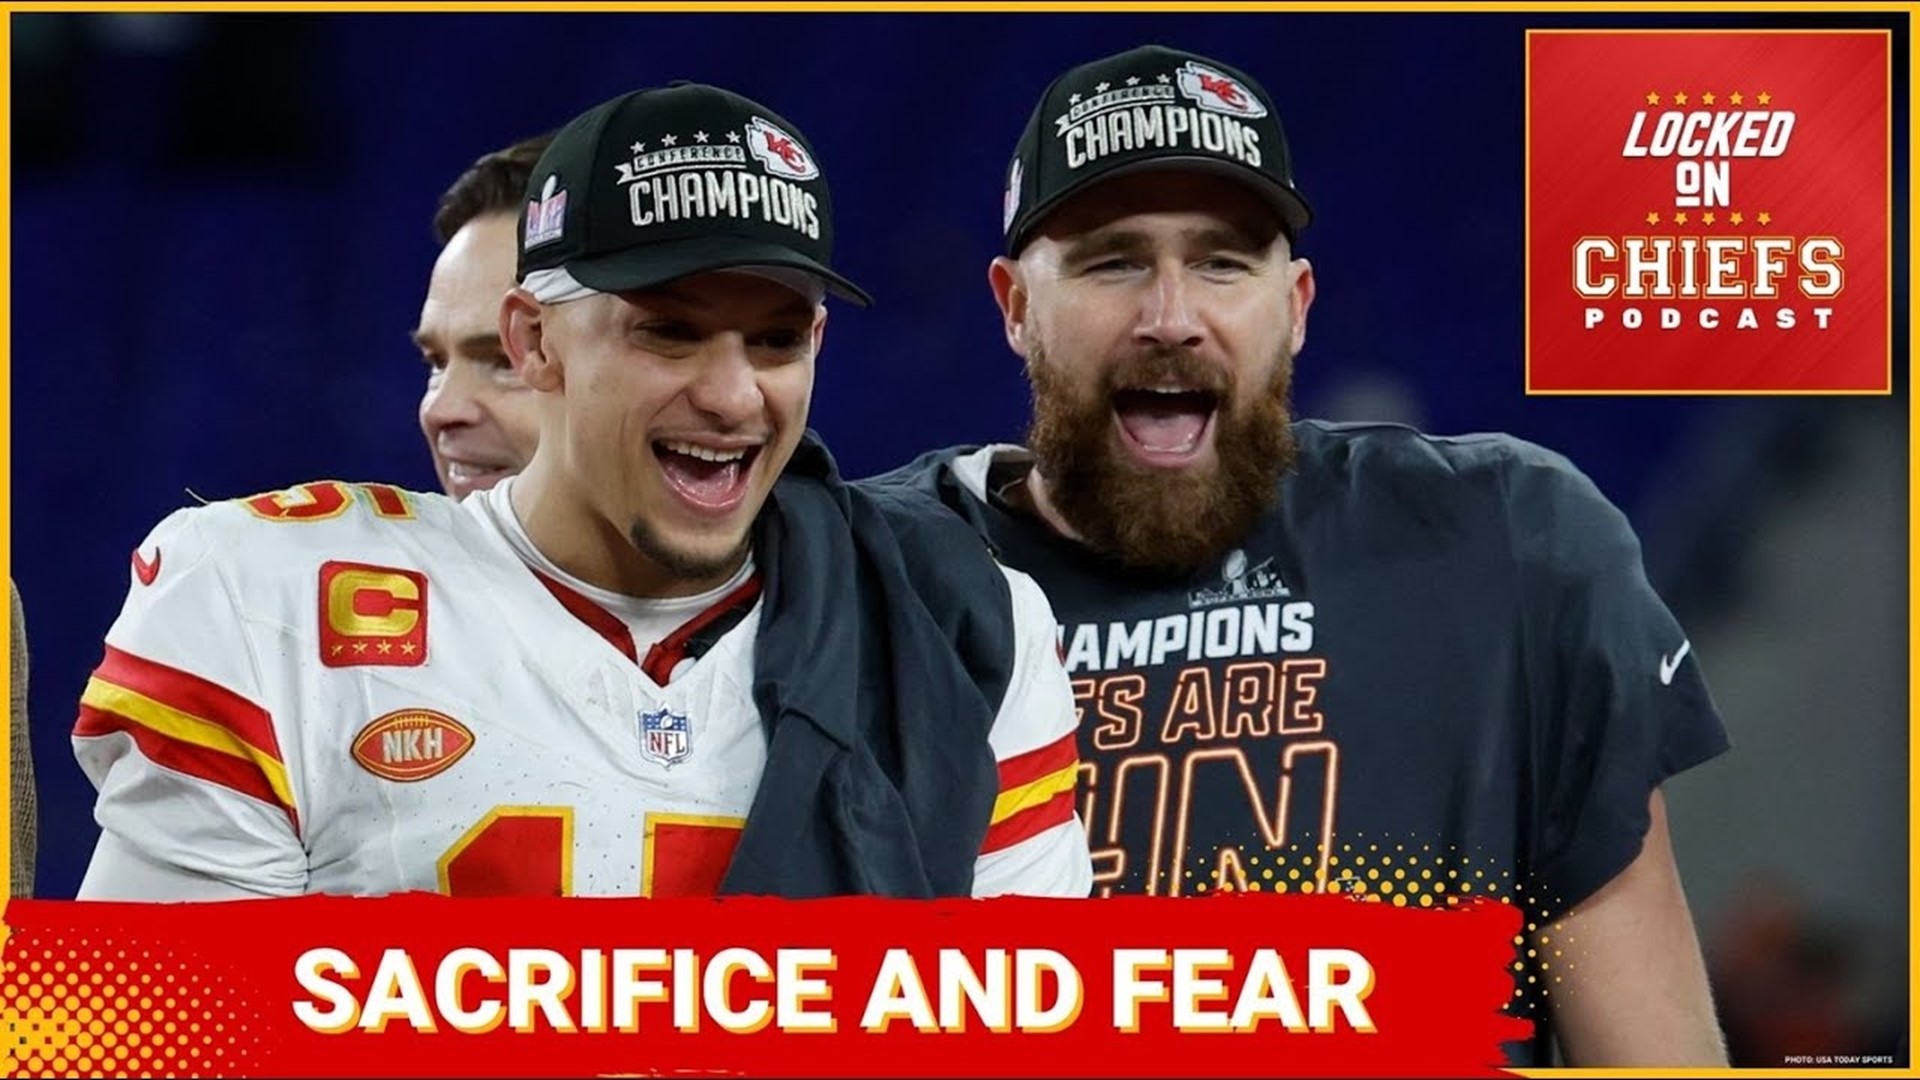 Chiefs Travis Kelce’s Sacrifice for a Dynasty and Fear for the 49ers